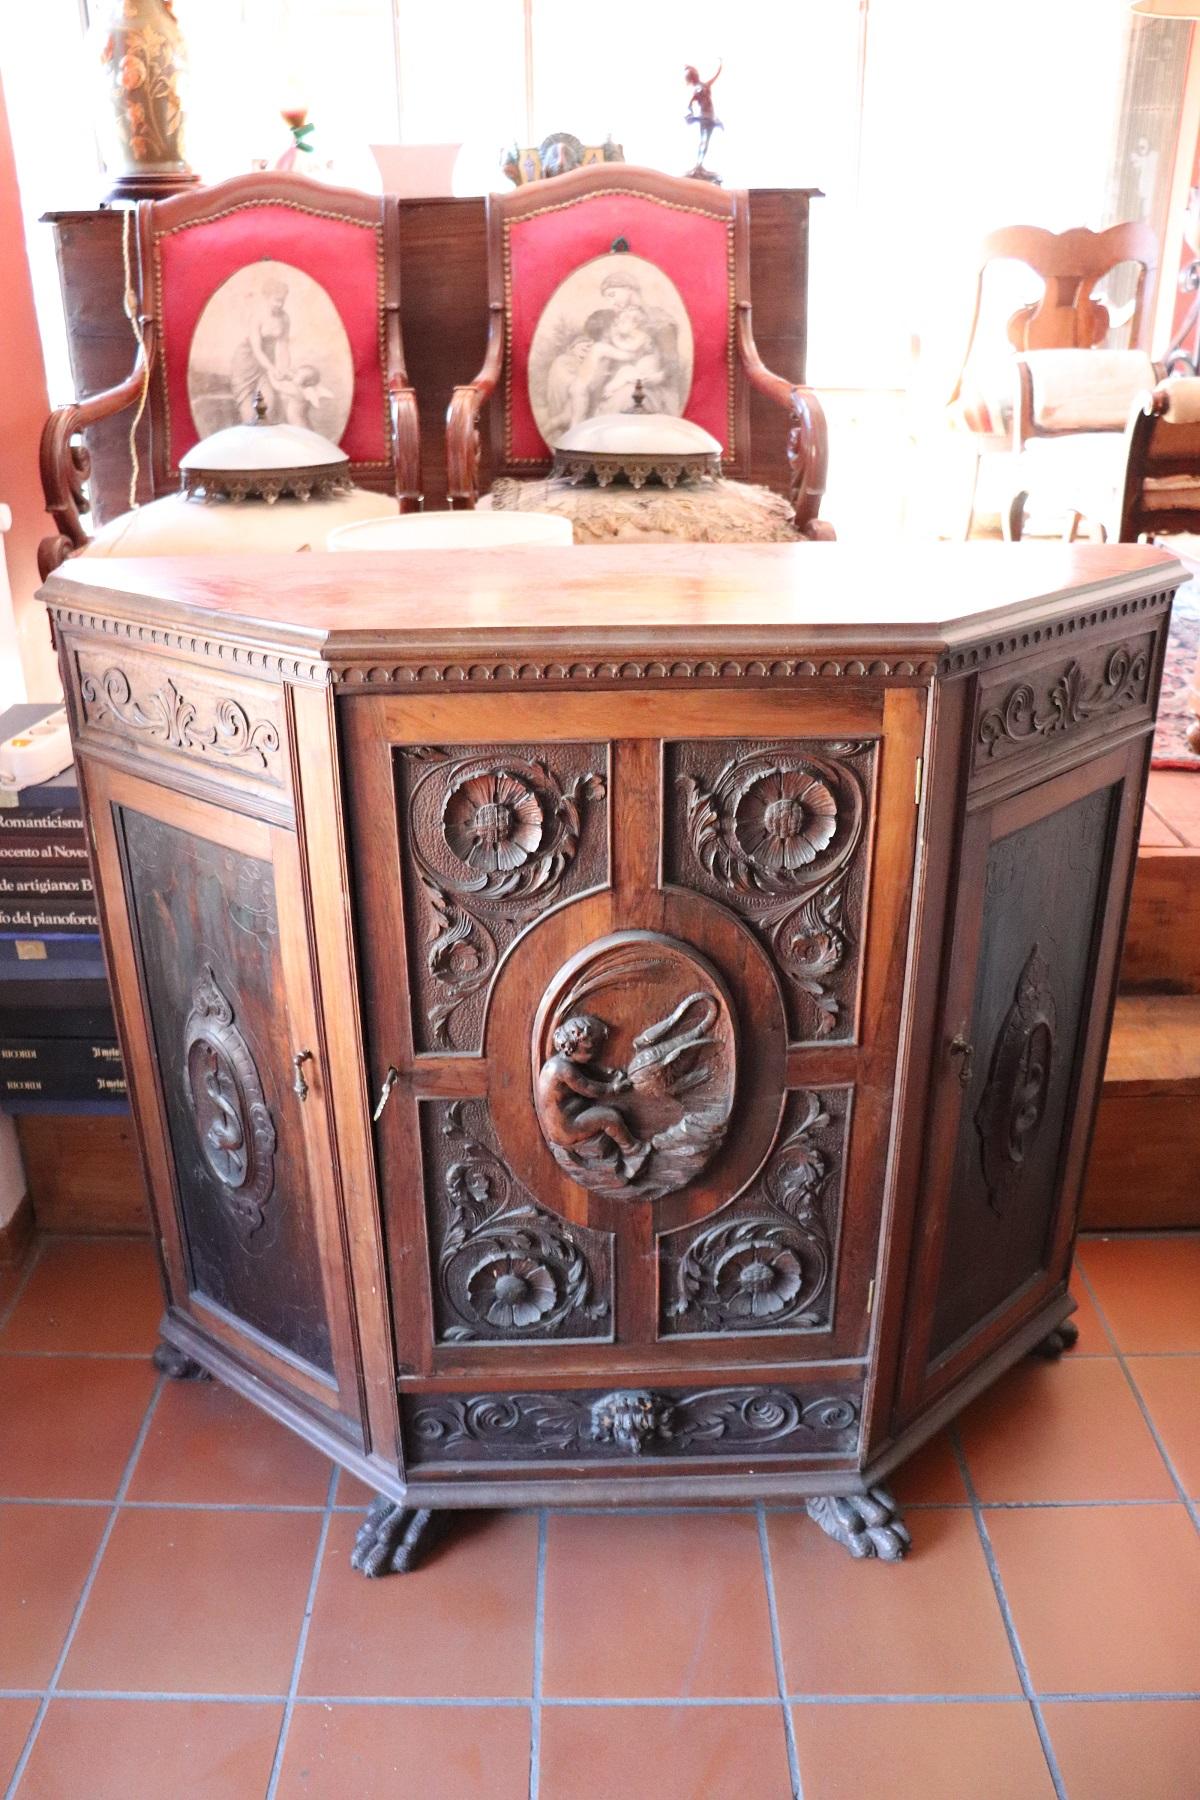 Beautiful rare large sideboard from the 19th century in carved walnut wood. Walnut wood has a beautiful light patina. Door panels finely carved in walnut wood. On the front a sweet child playing with a swan. Ample useful internal space with refined